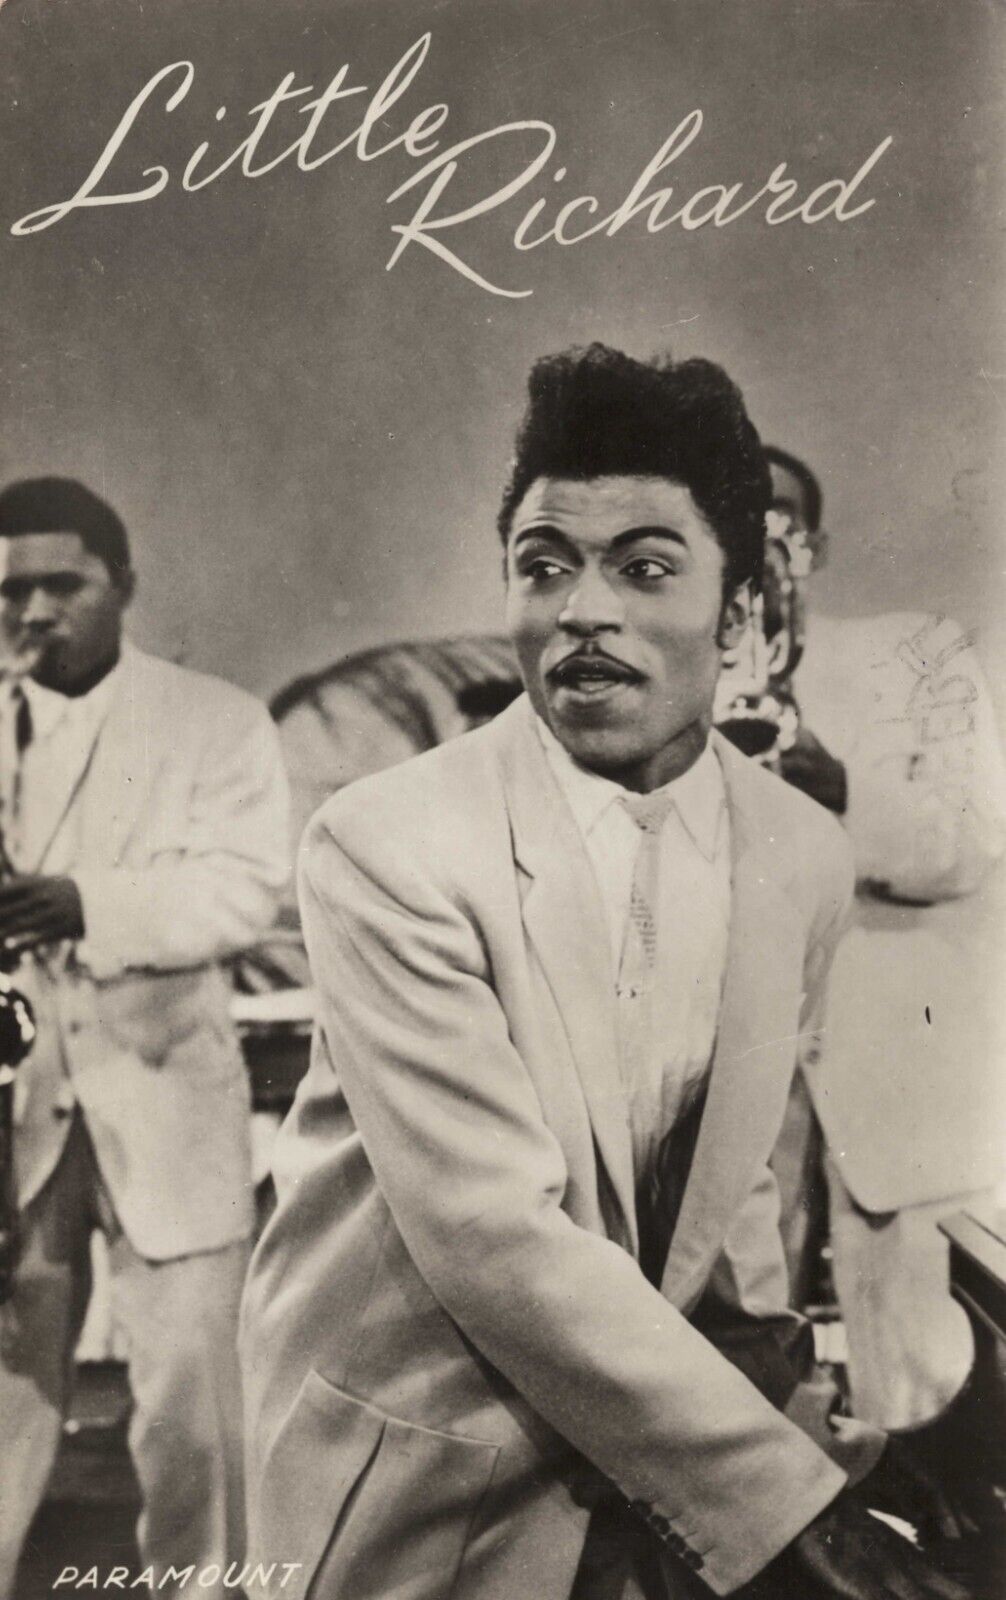 Little Richard in Mister Rock and Roll Paramount Vintage 1958 Dutch Postcard